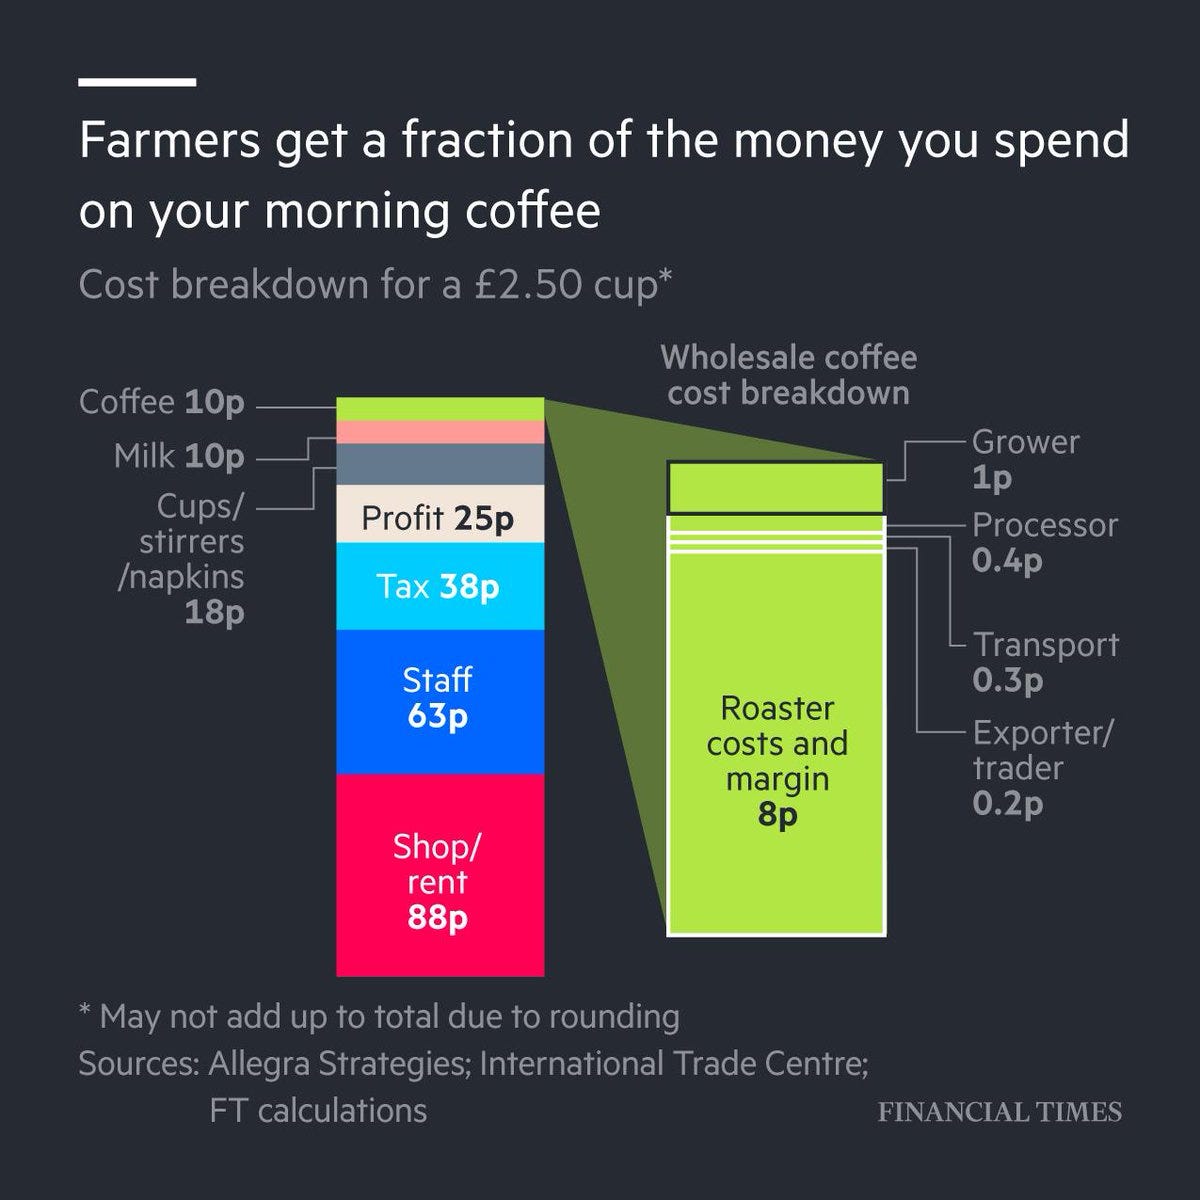 Financial Times on Twitter: "In a £2.50 brew, the coffee itself accounts  for just 10p, only a fraction of which goes to the farmer  https://t.co/BvUK4Qakpy… https://t.co/Ehf0ekUKSj"